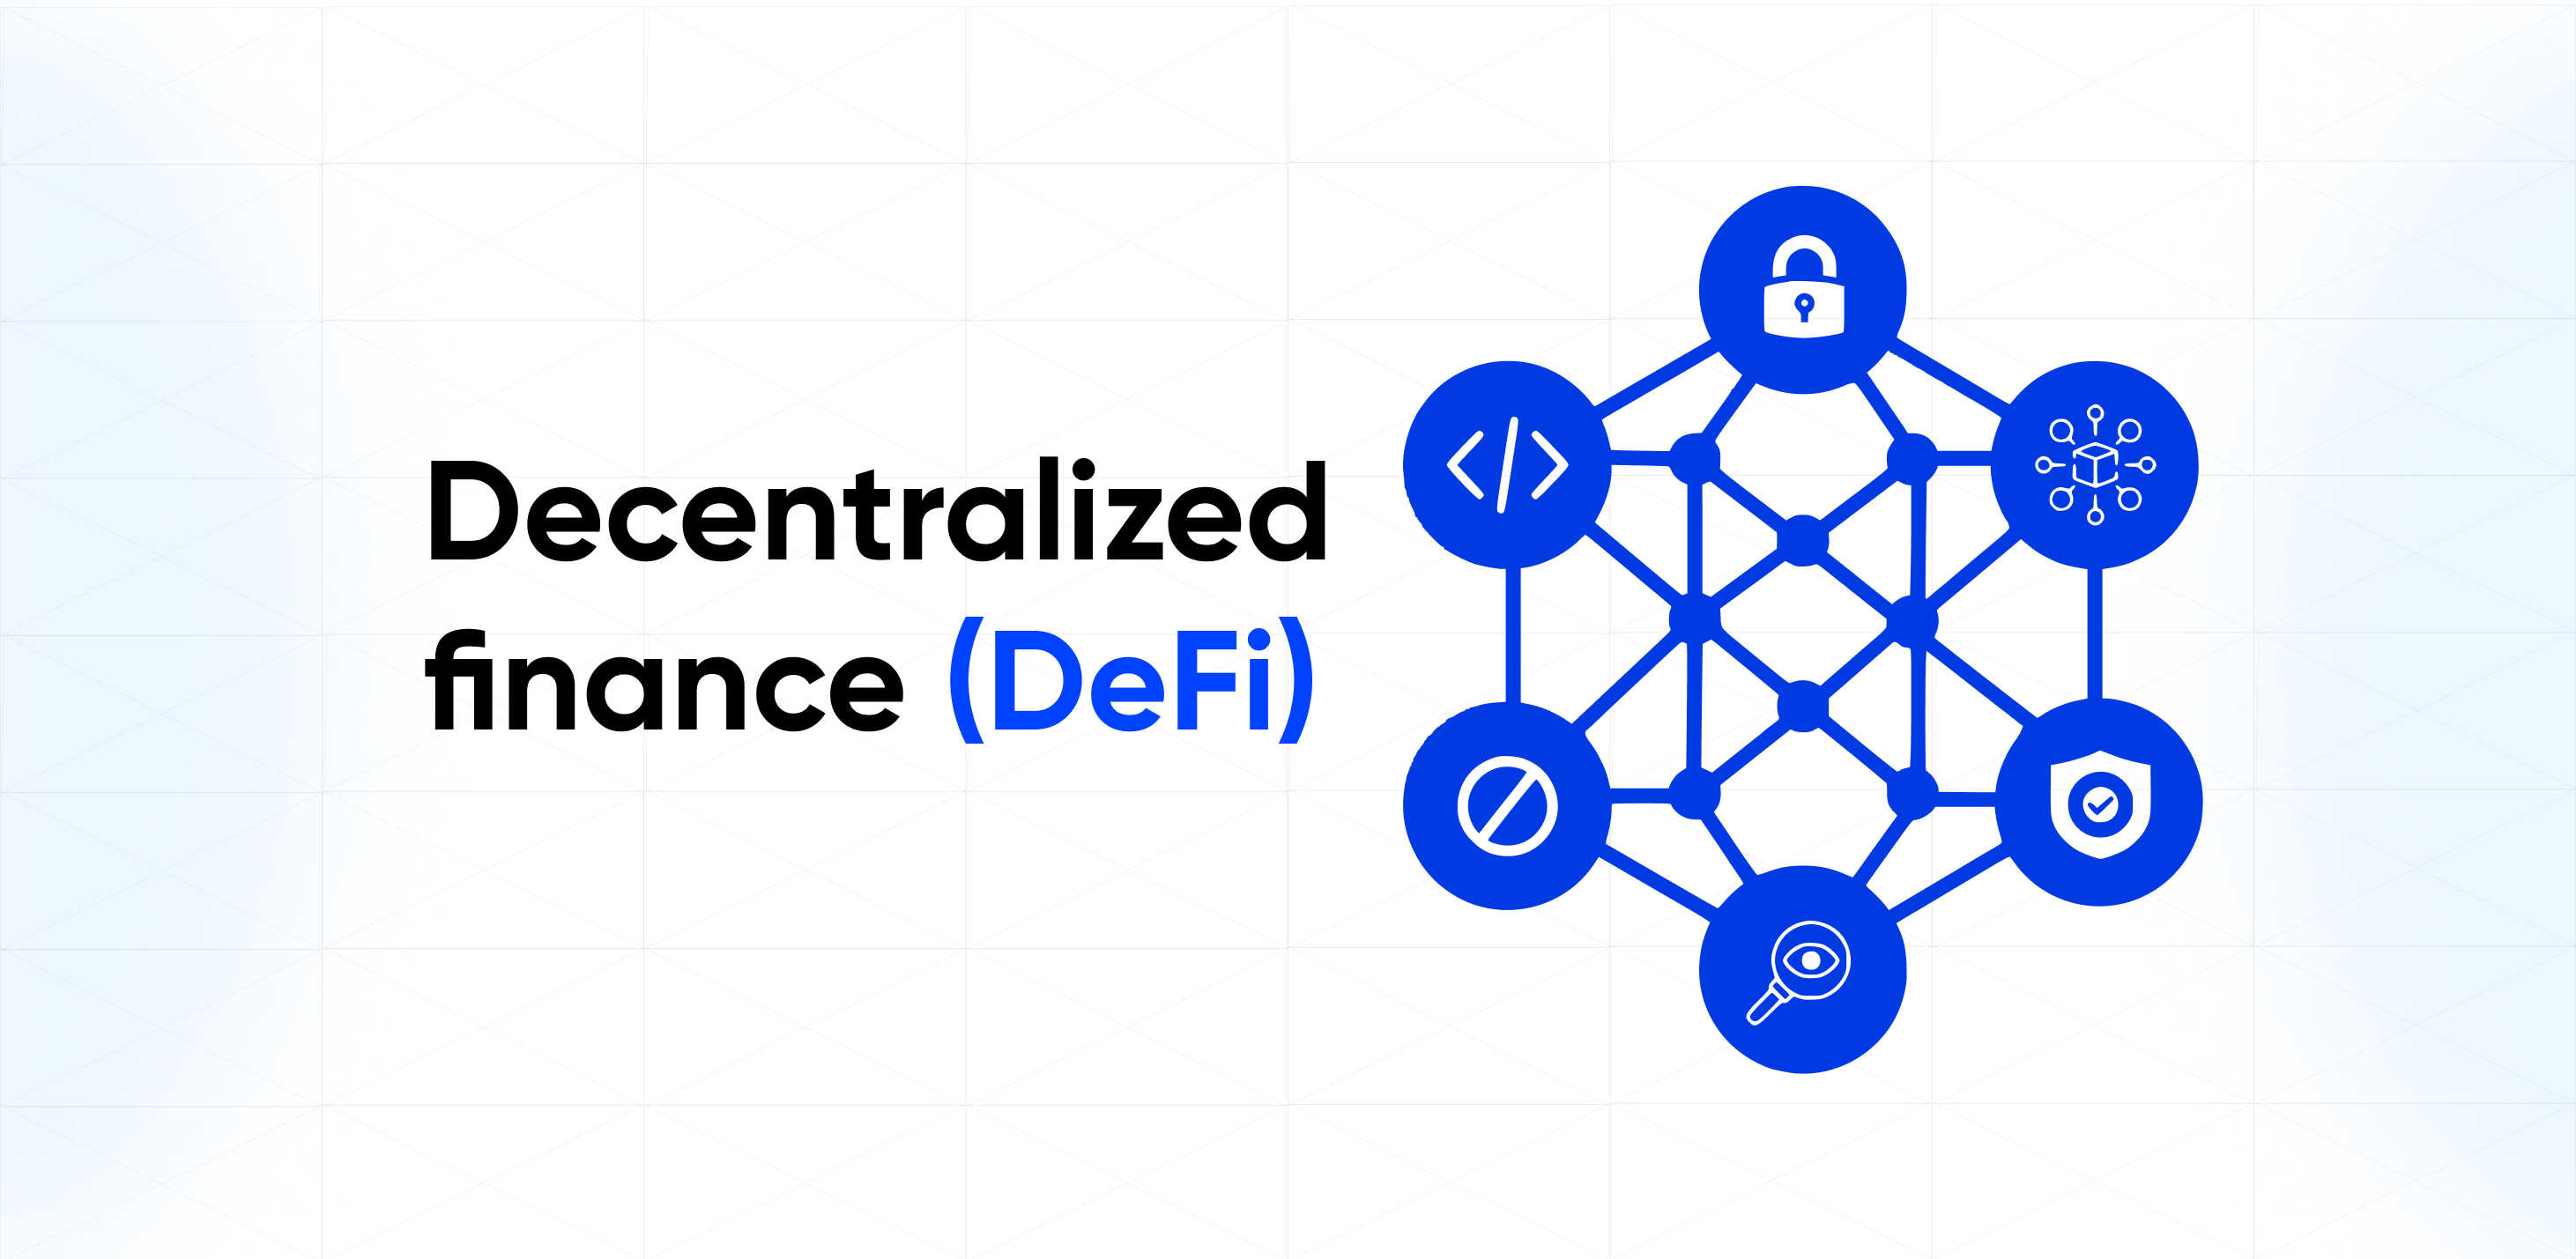 Decentralized finance (DeFi) for businesses: opportunities and risks